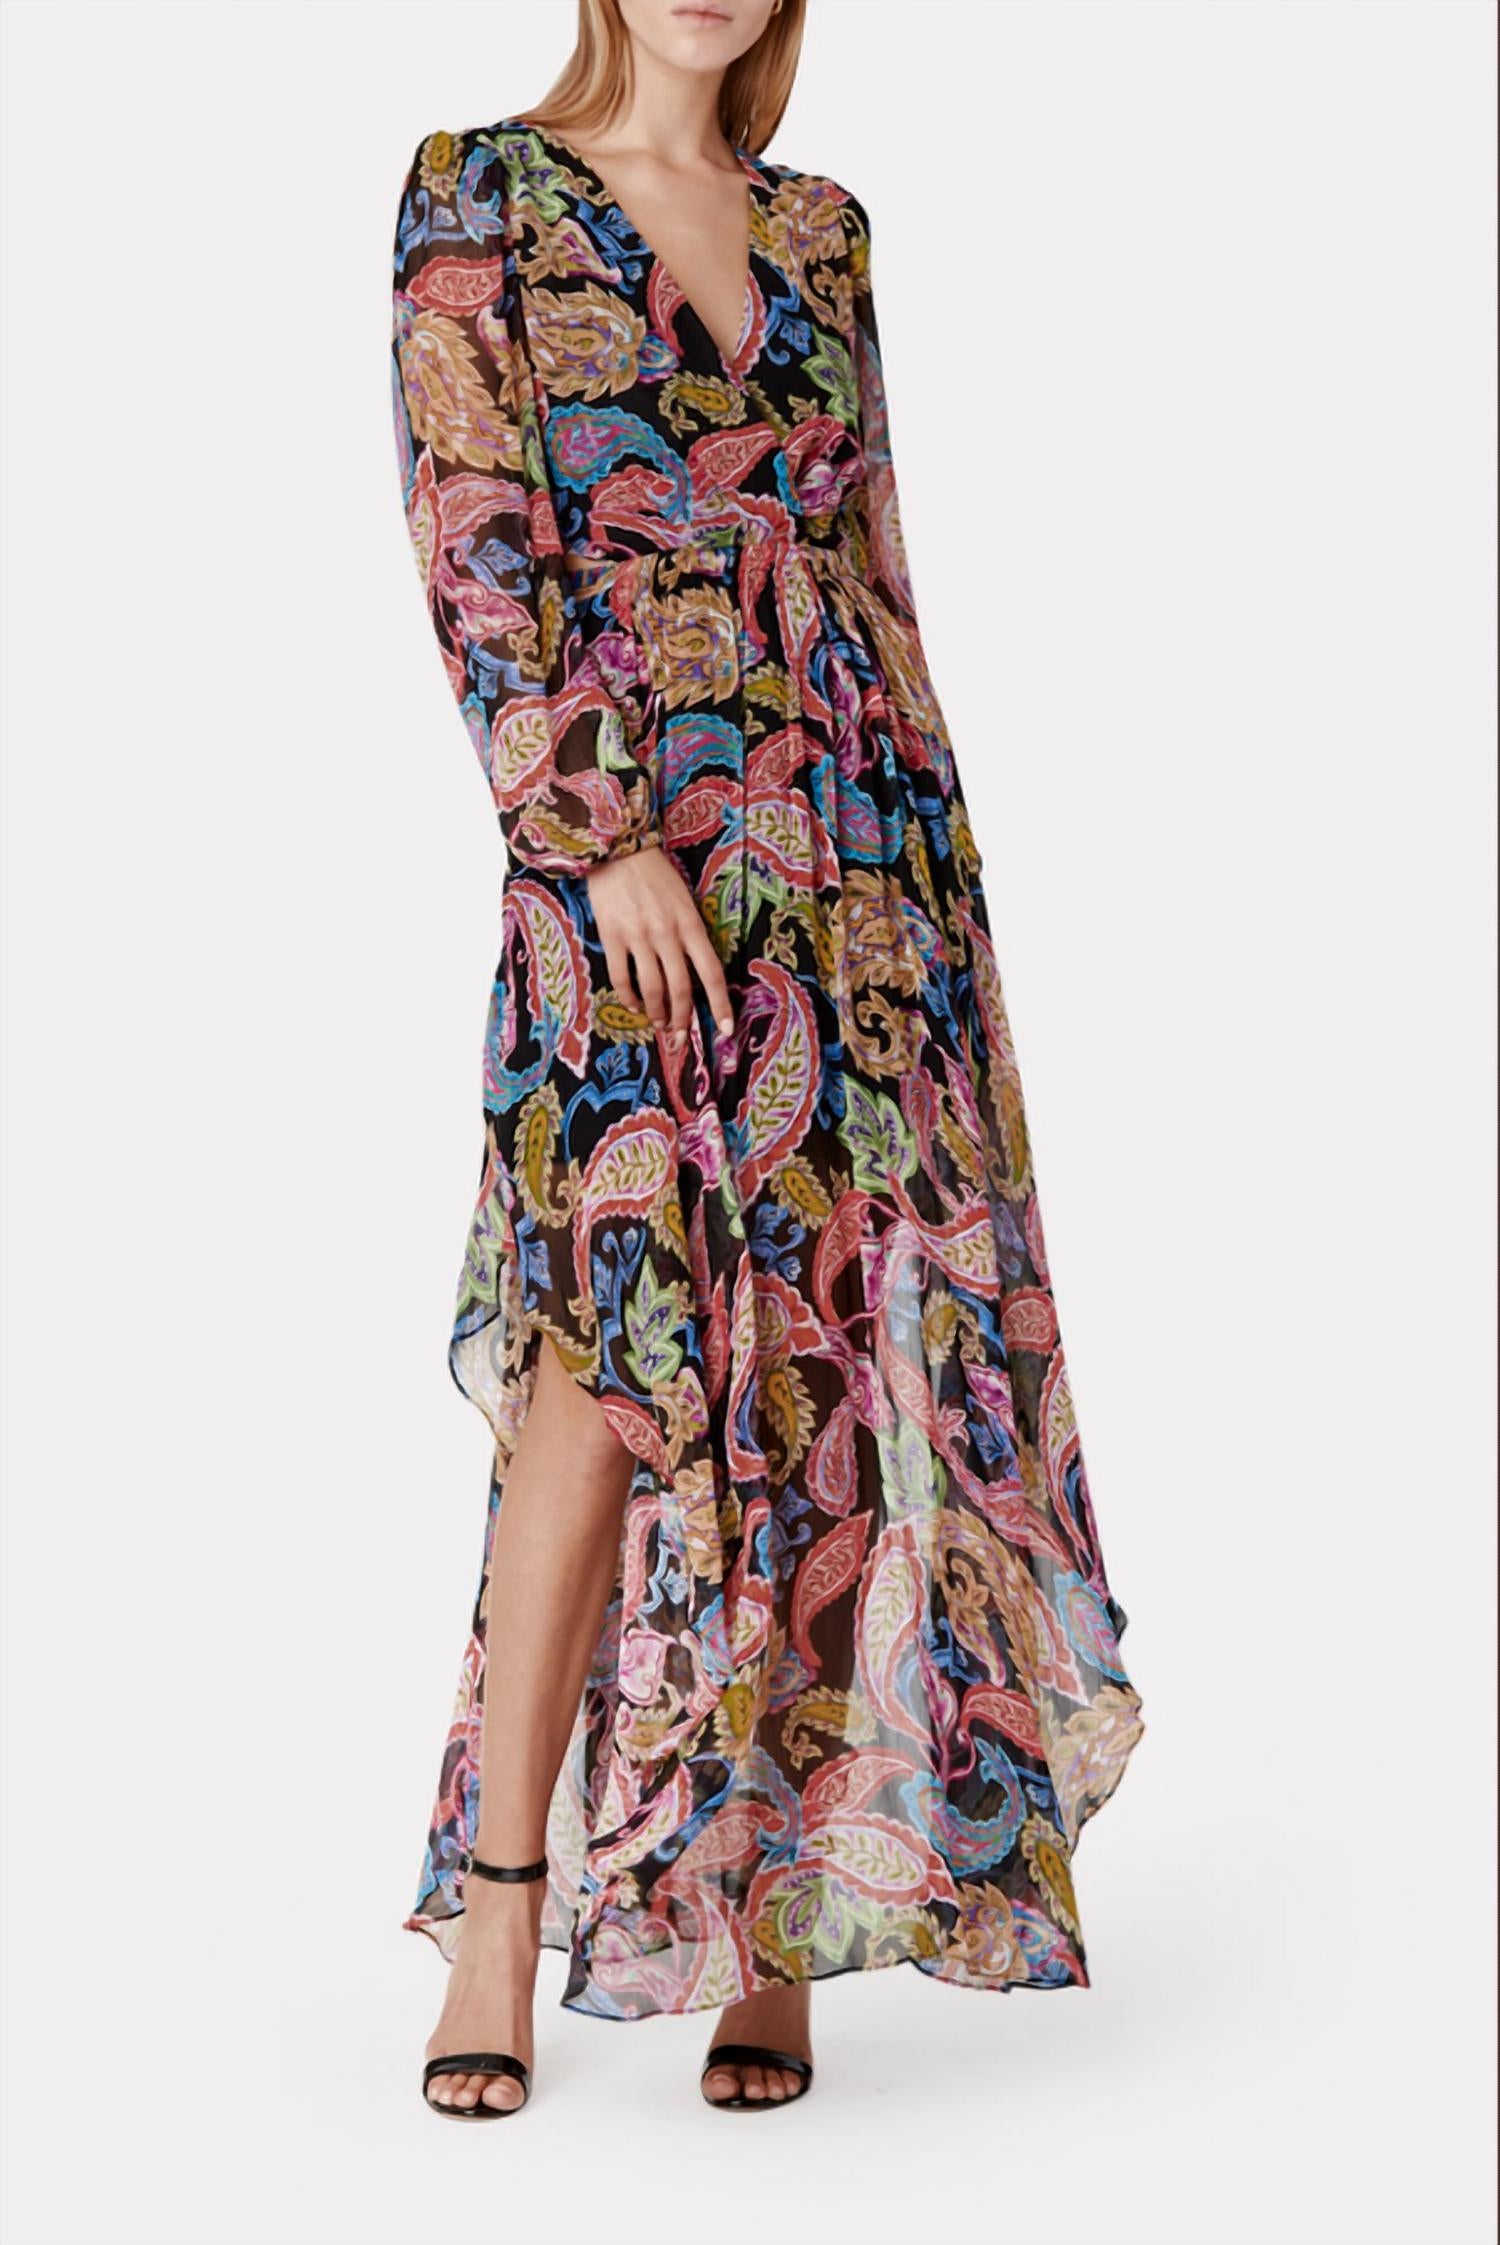 MILLY Wilfred Paisley Chiffon Dress in Black Multi